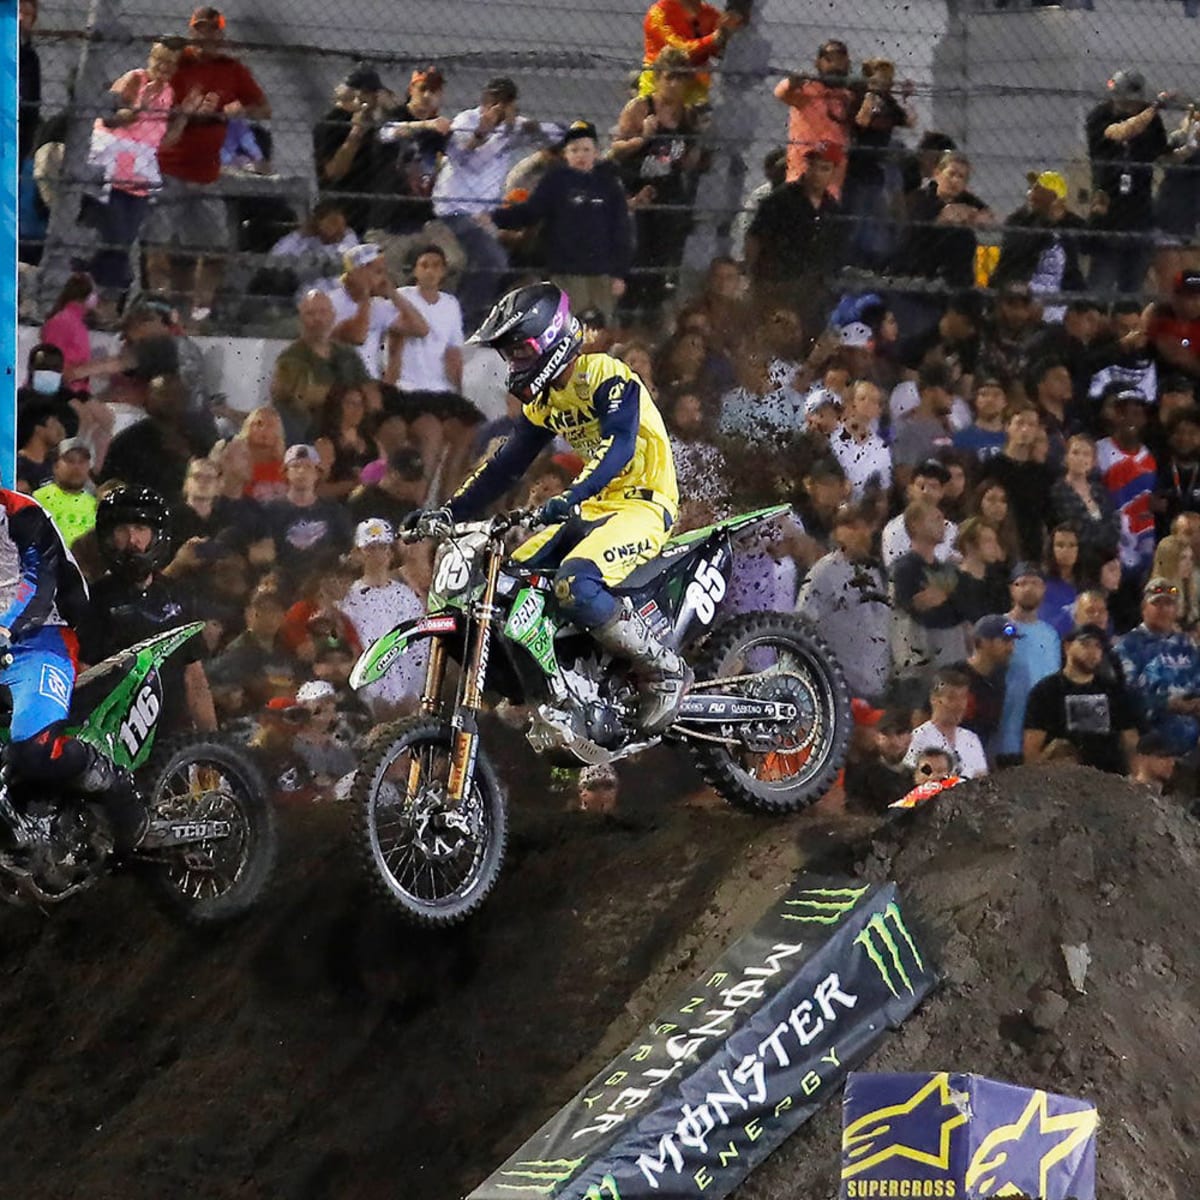 A racing fan won a contest to design supercross courses